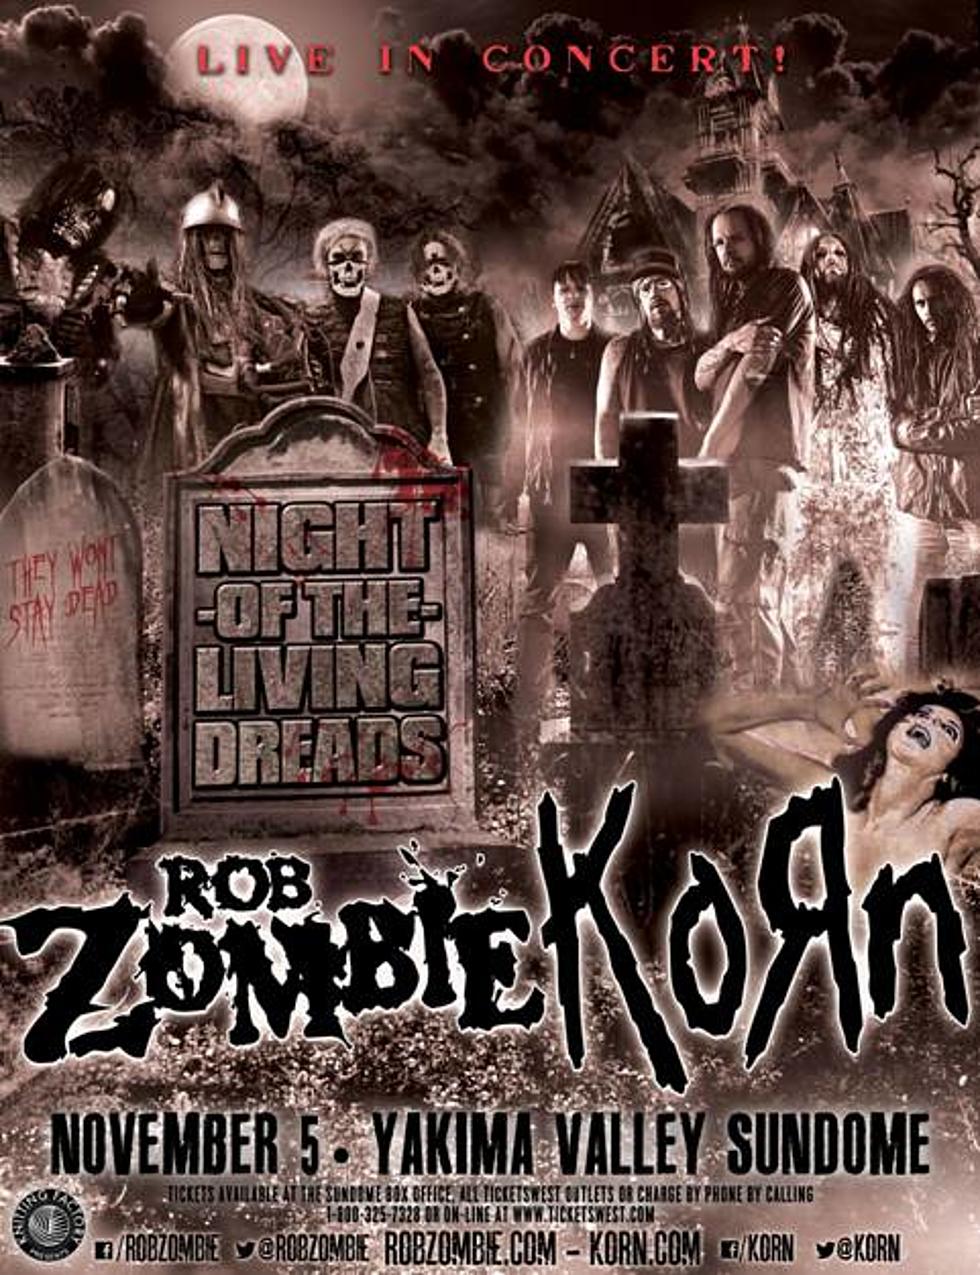 ‘Night Of The Living Dreads’ Tour, Rob Zombie and Korn Live At The Sundome!